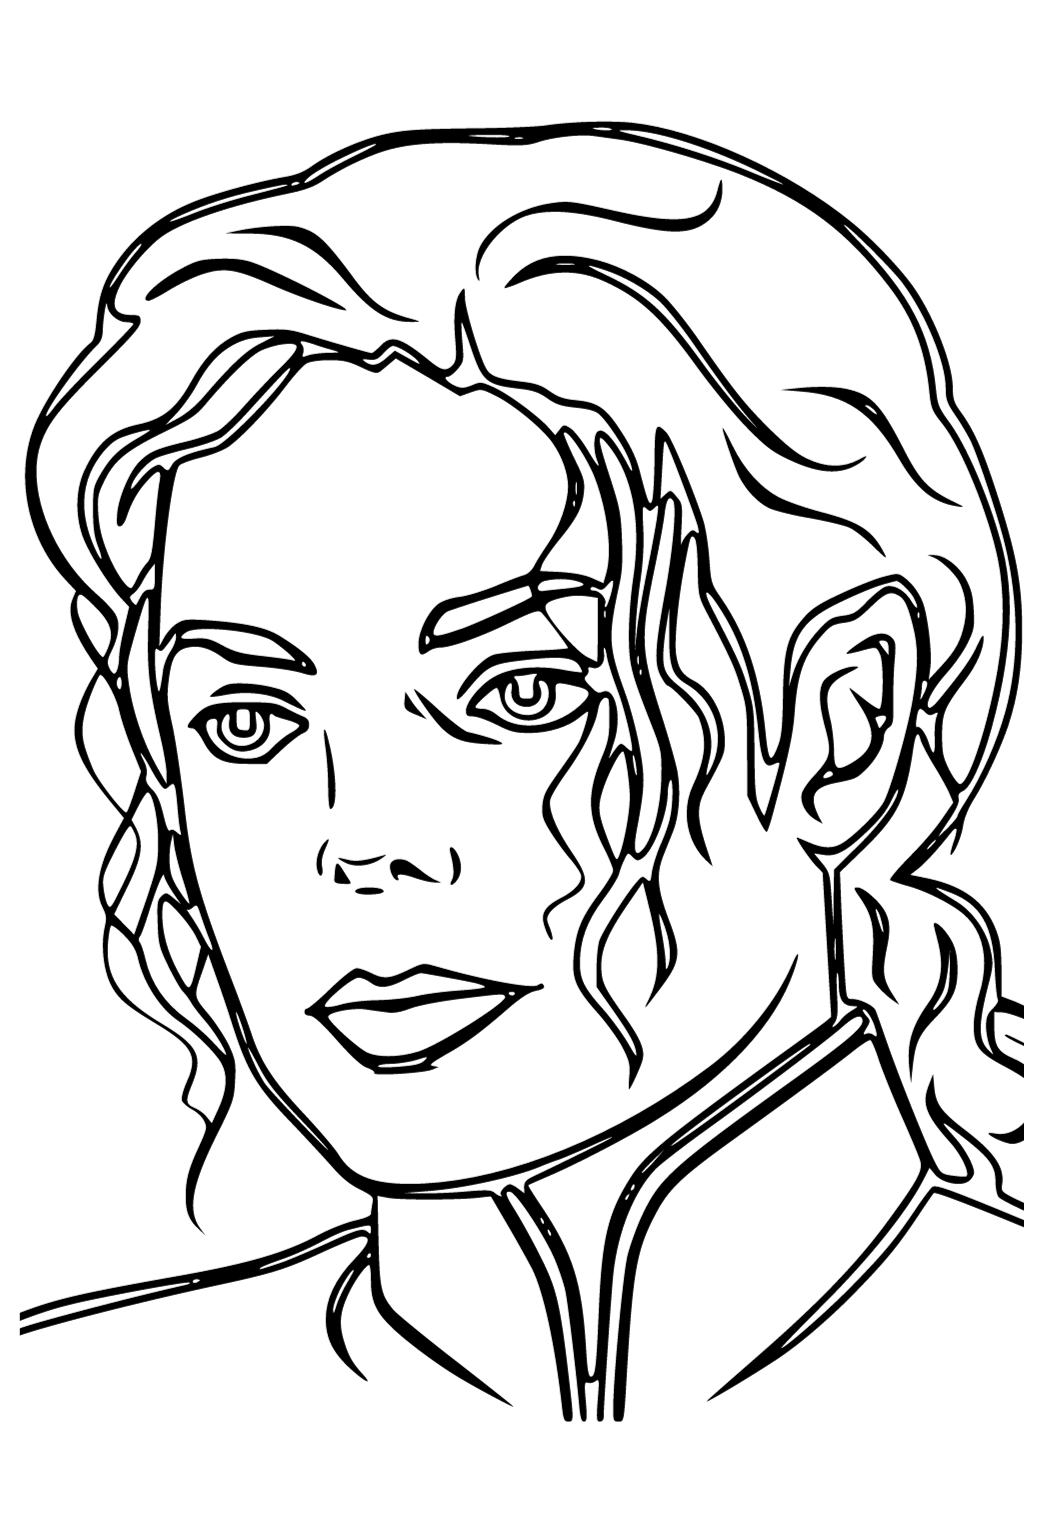 Free printable michael jackson face coloring page for adults and kids